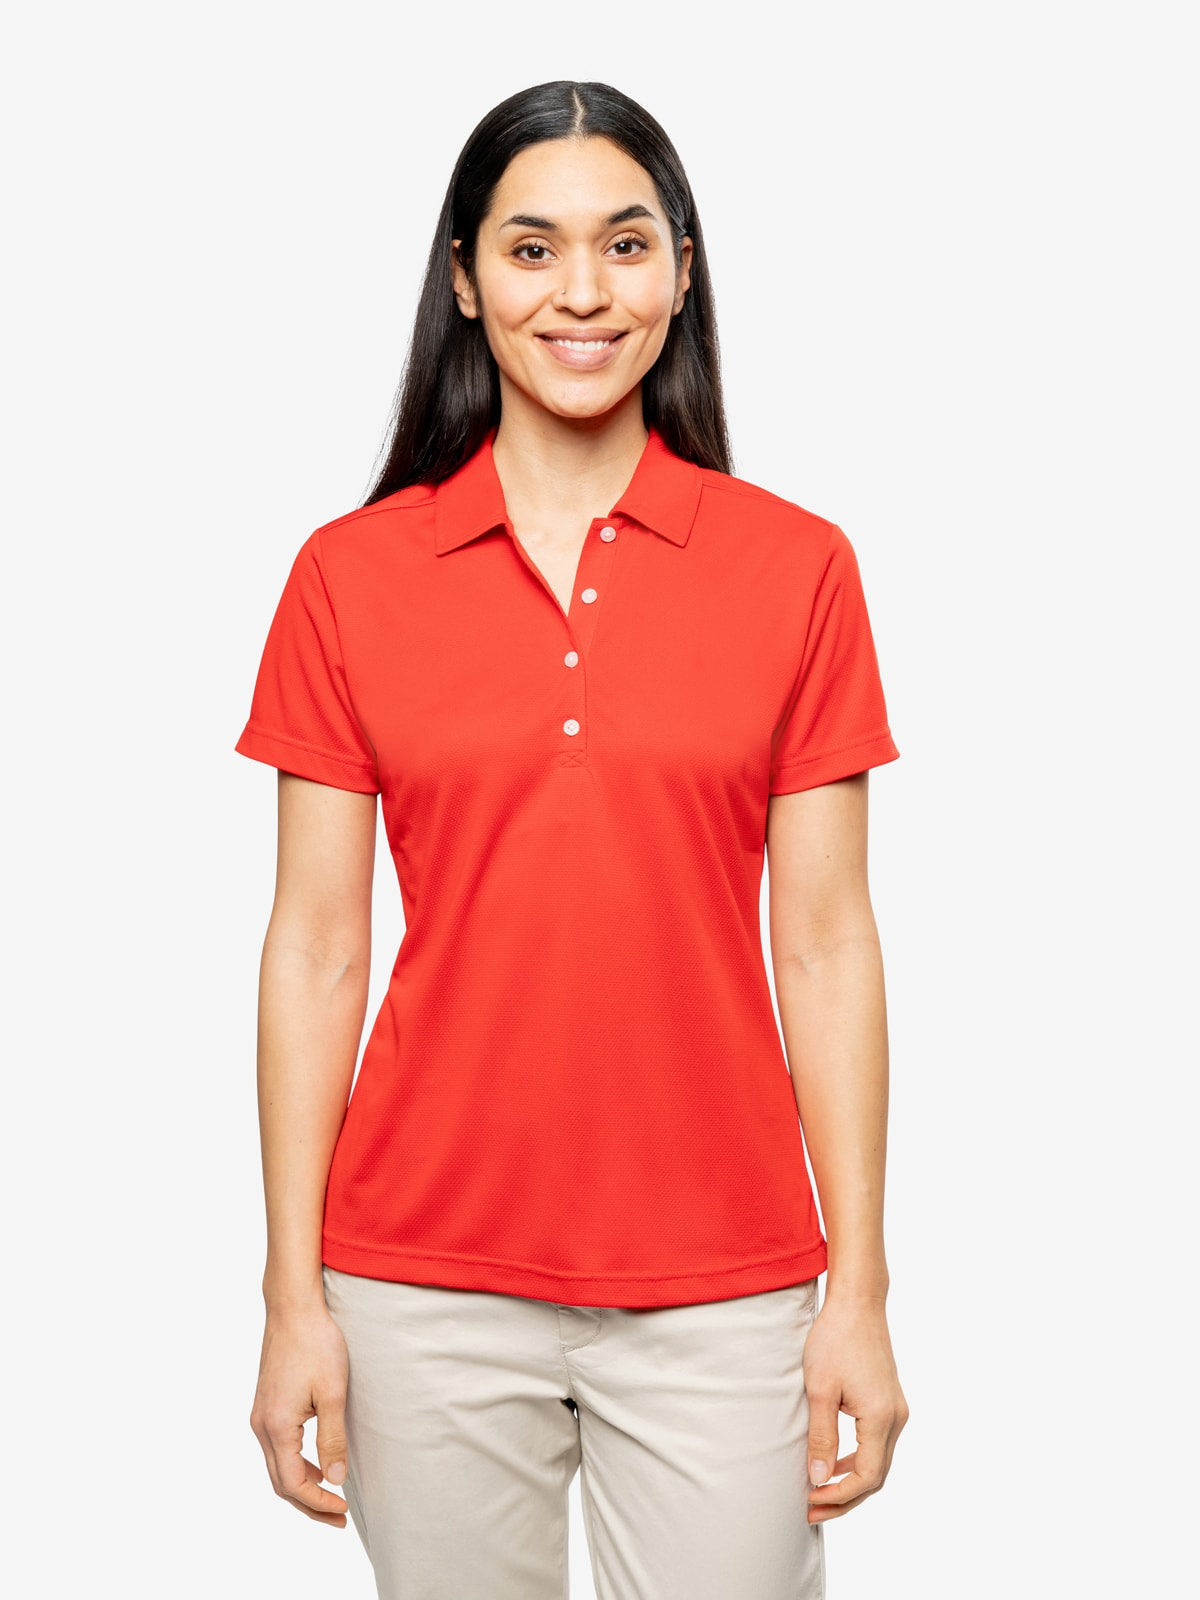 Insect Shield Women's Airflow Short Sleeve Polo Shirt